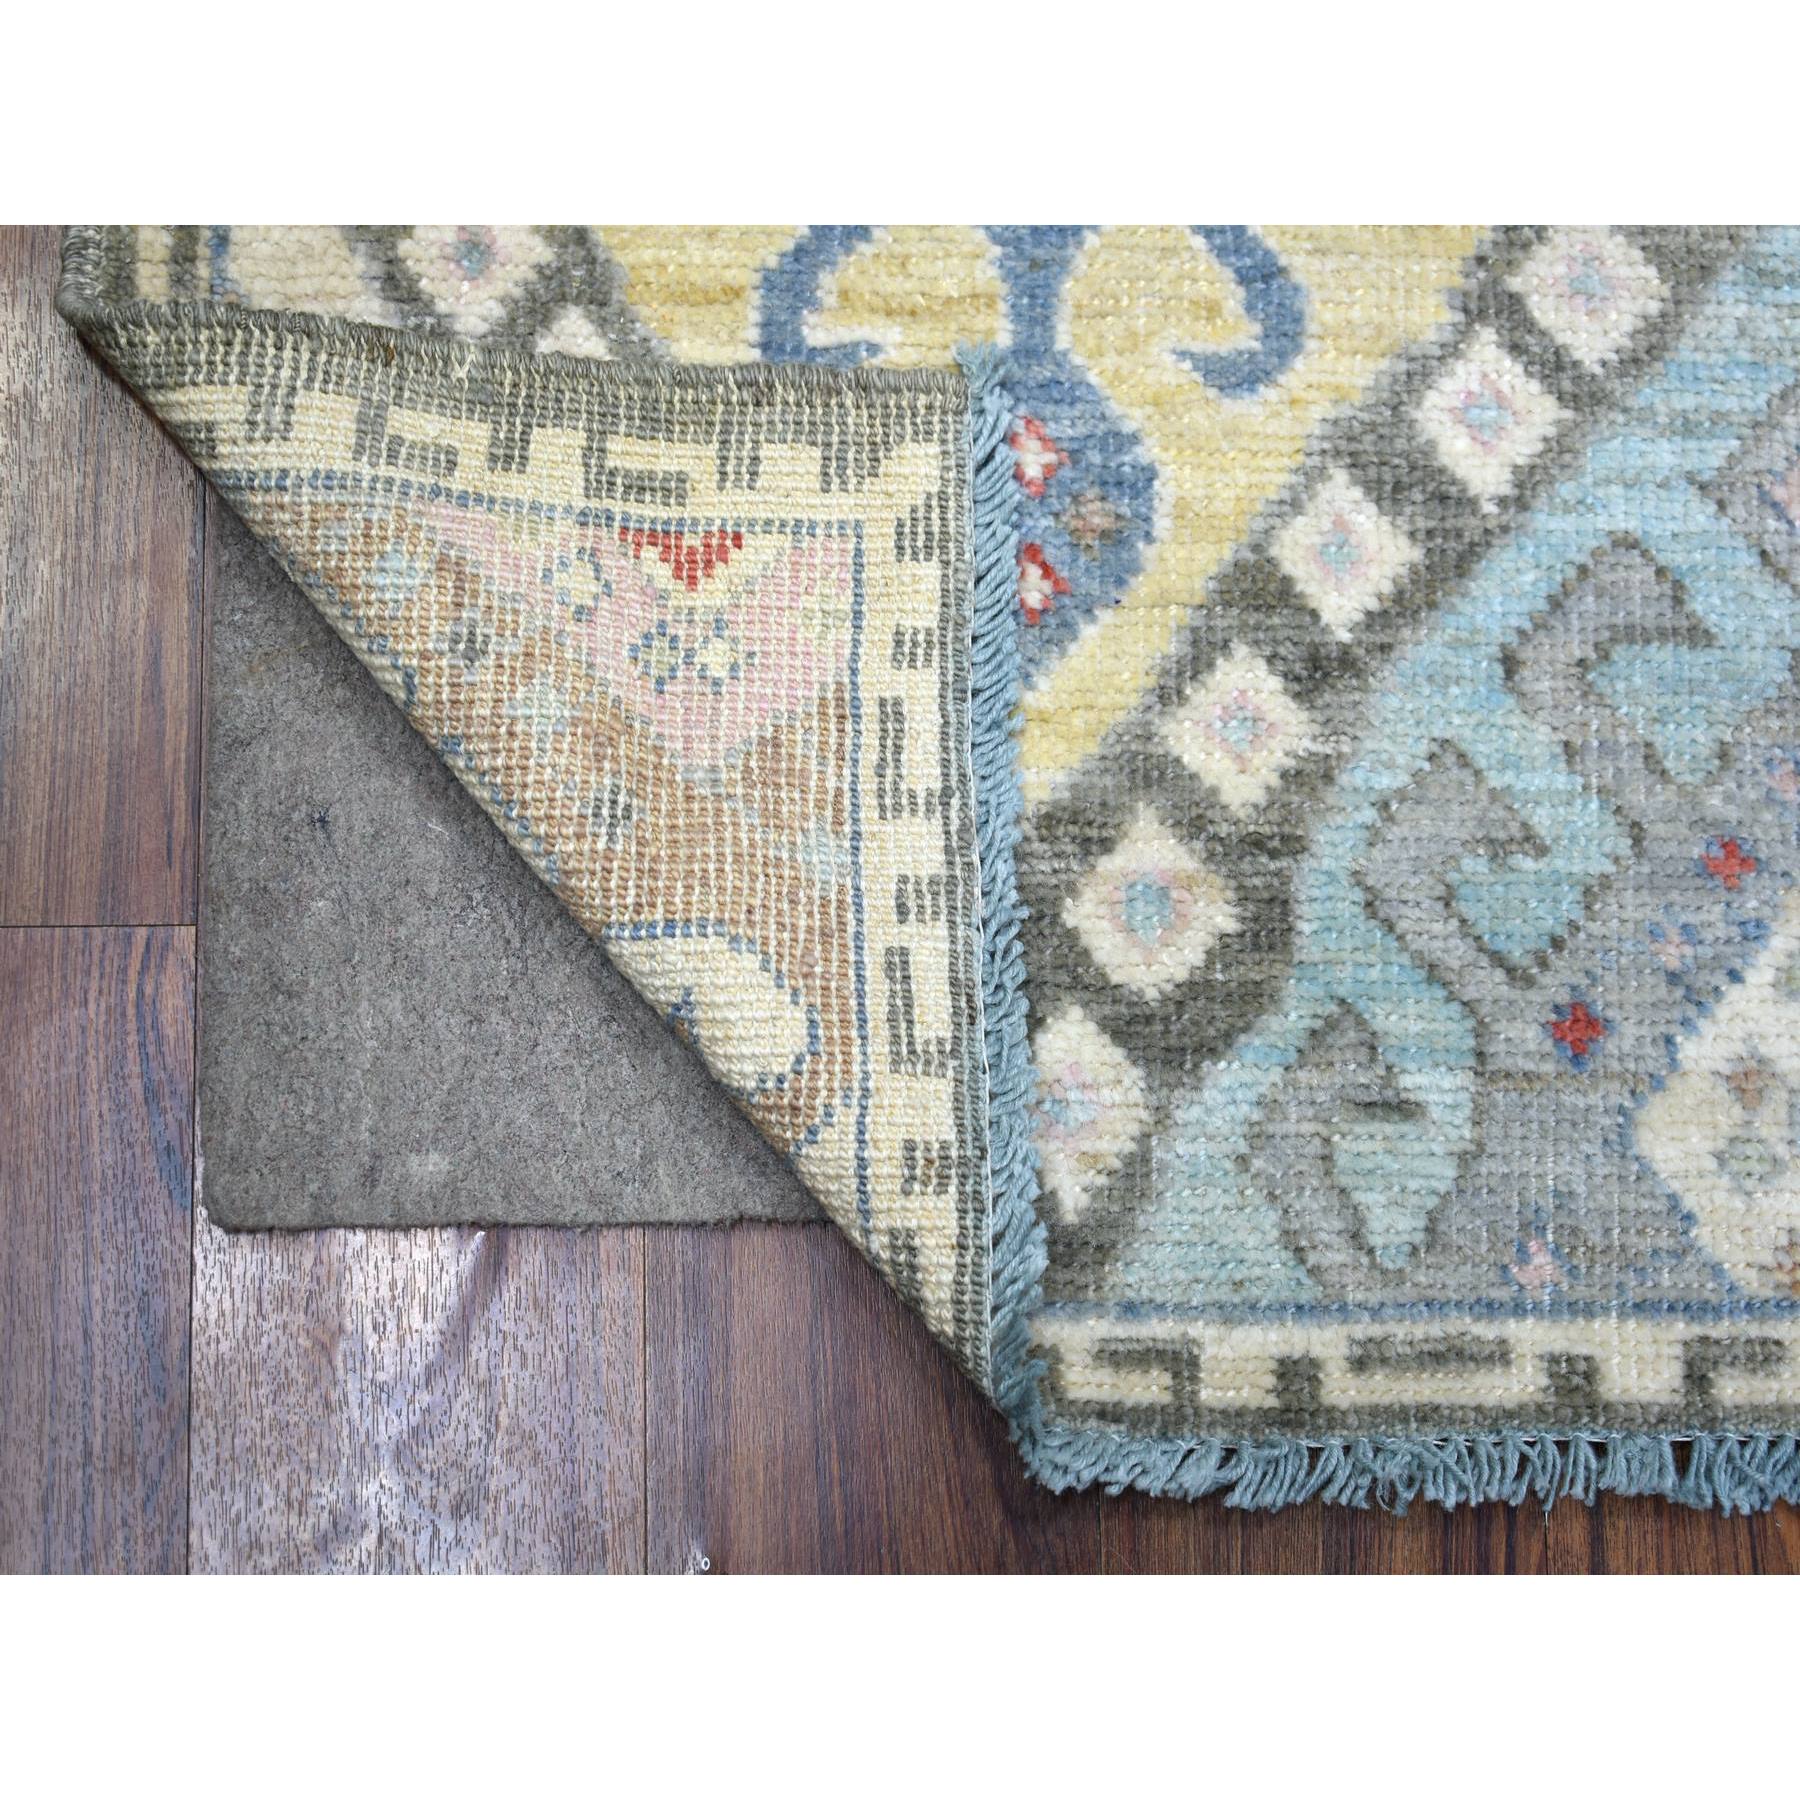 3'2"x5' Charcoal Gray, Anatolian Village Inspired with Large Elements Design Natural Dyes, Soft Wool Hand Woven, Oriental Rug 